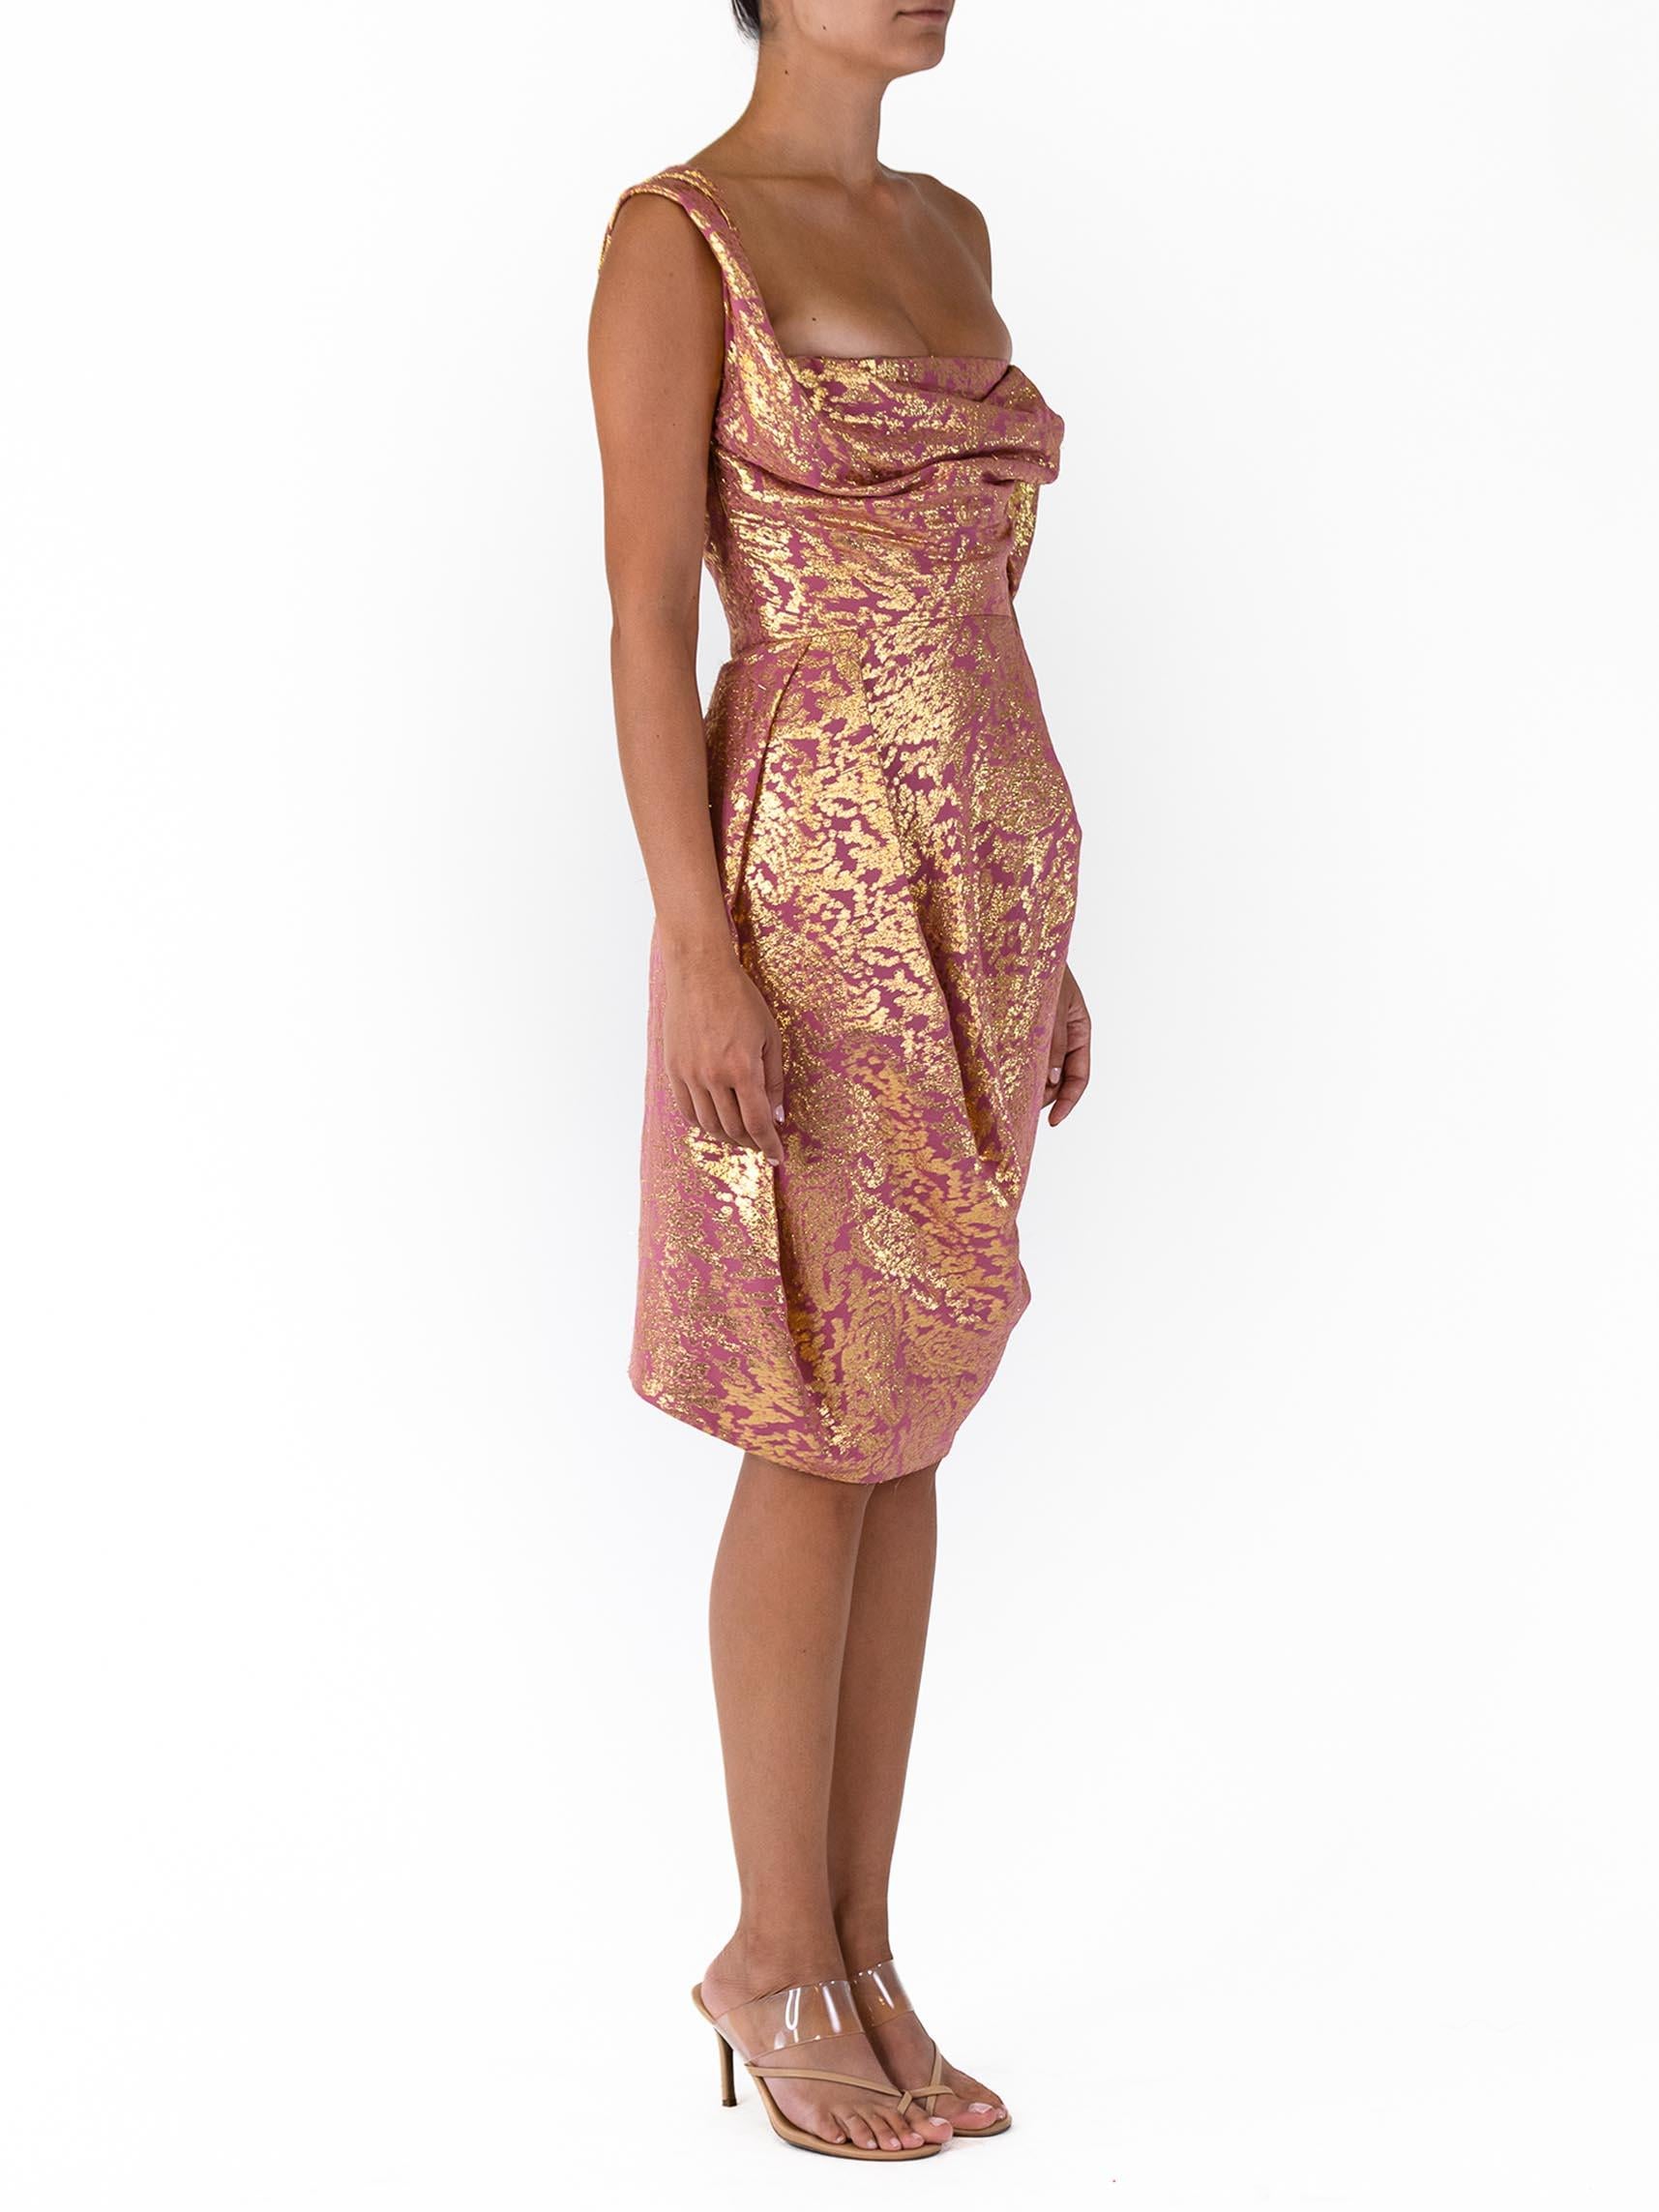 2000S VIVIENNE WESTWOOD Pink & Gold Silk Lurex Lamé Corseted Cocktail Dress In Excellent Condition For Sale In New York, NY